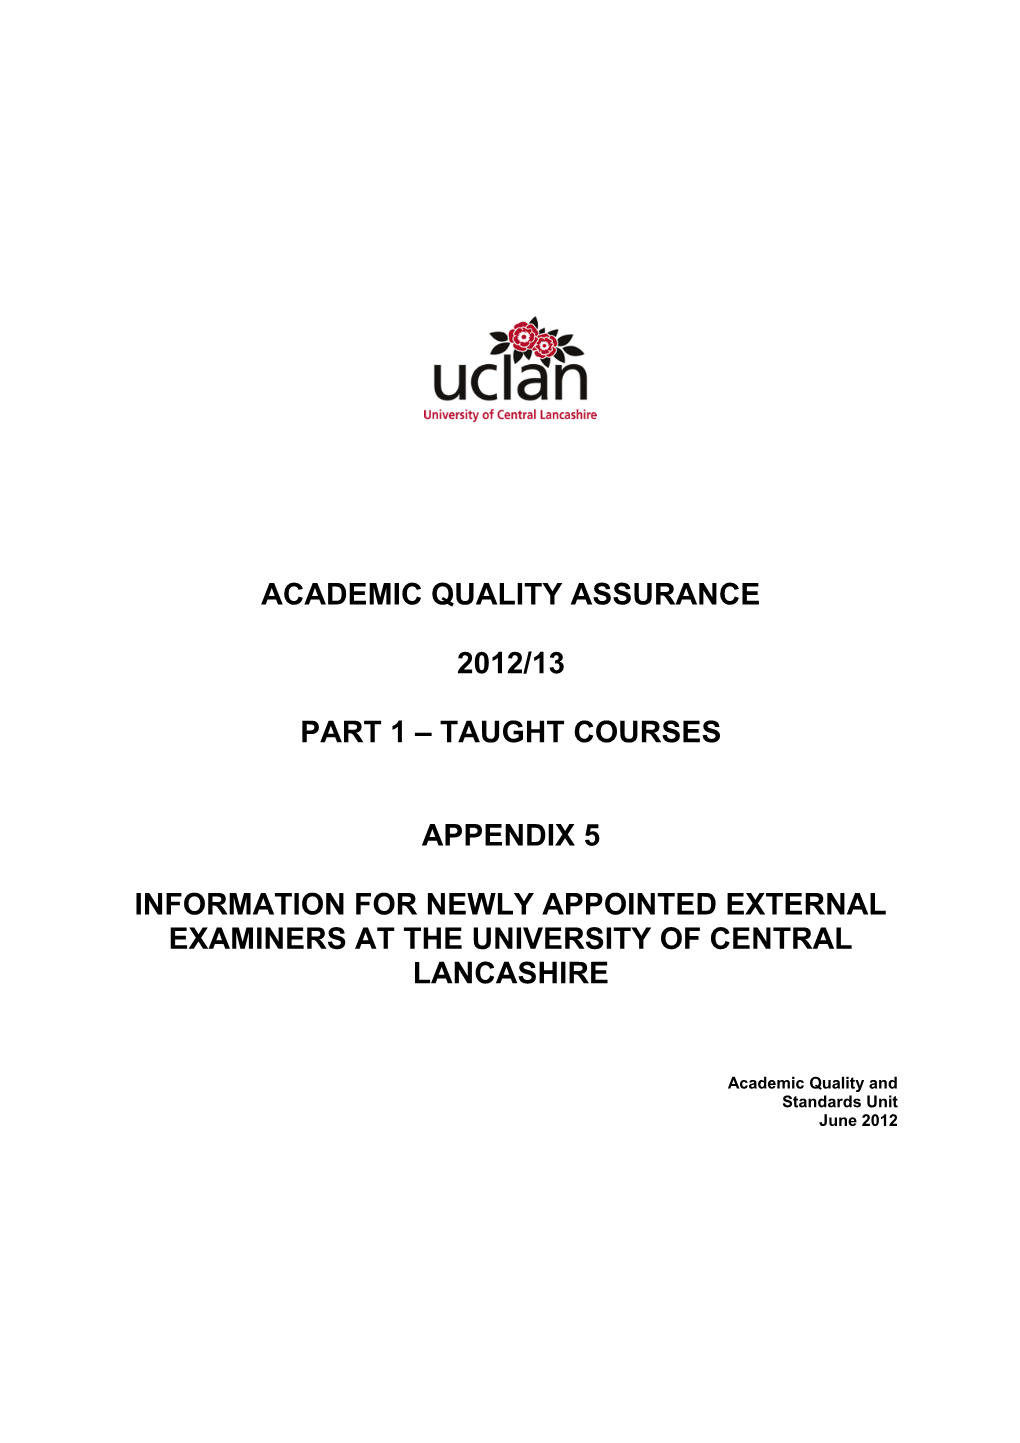 INFORMATION for NEWLY APPOINTED EXTERNAL EXAMINERS at the University of Central Lancashire